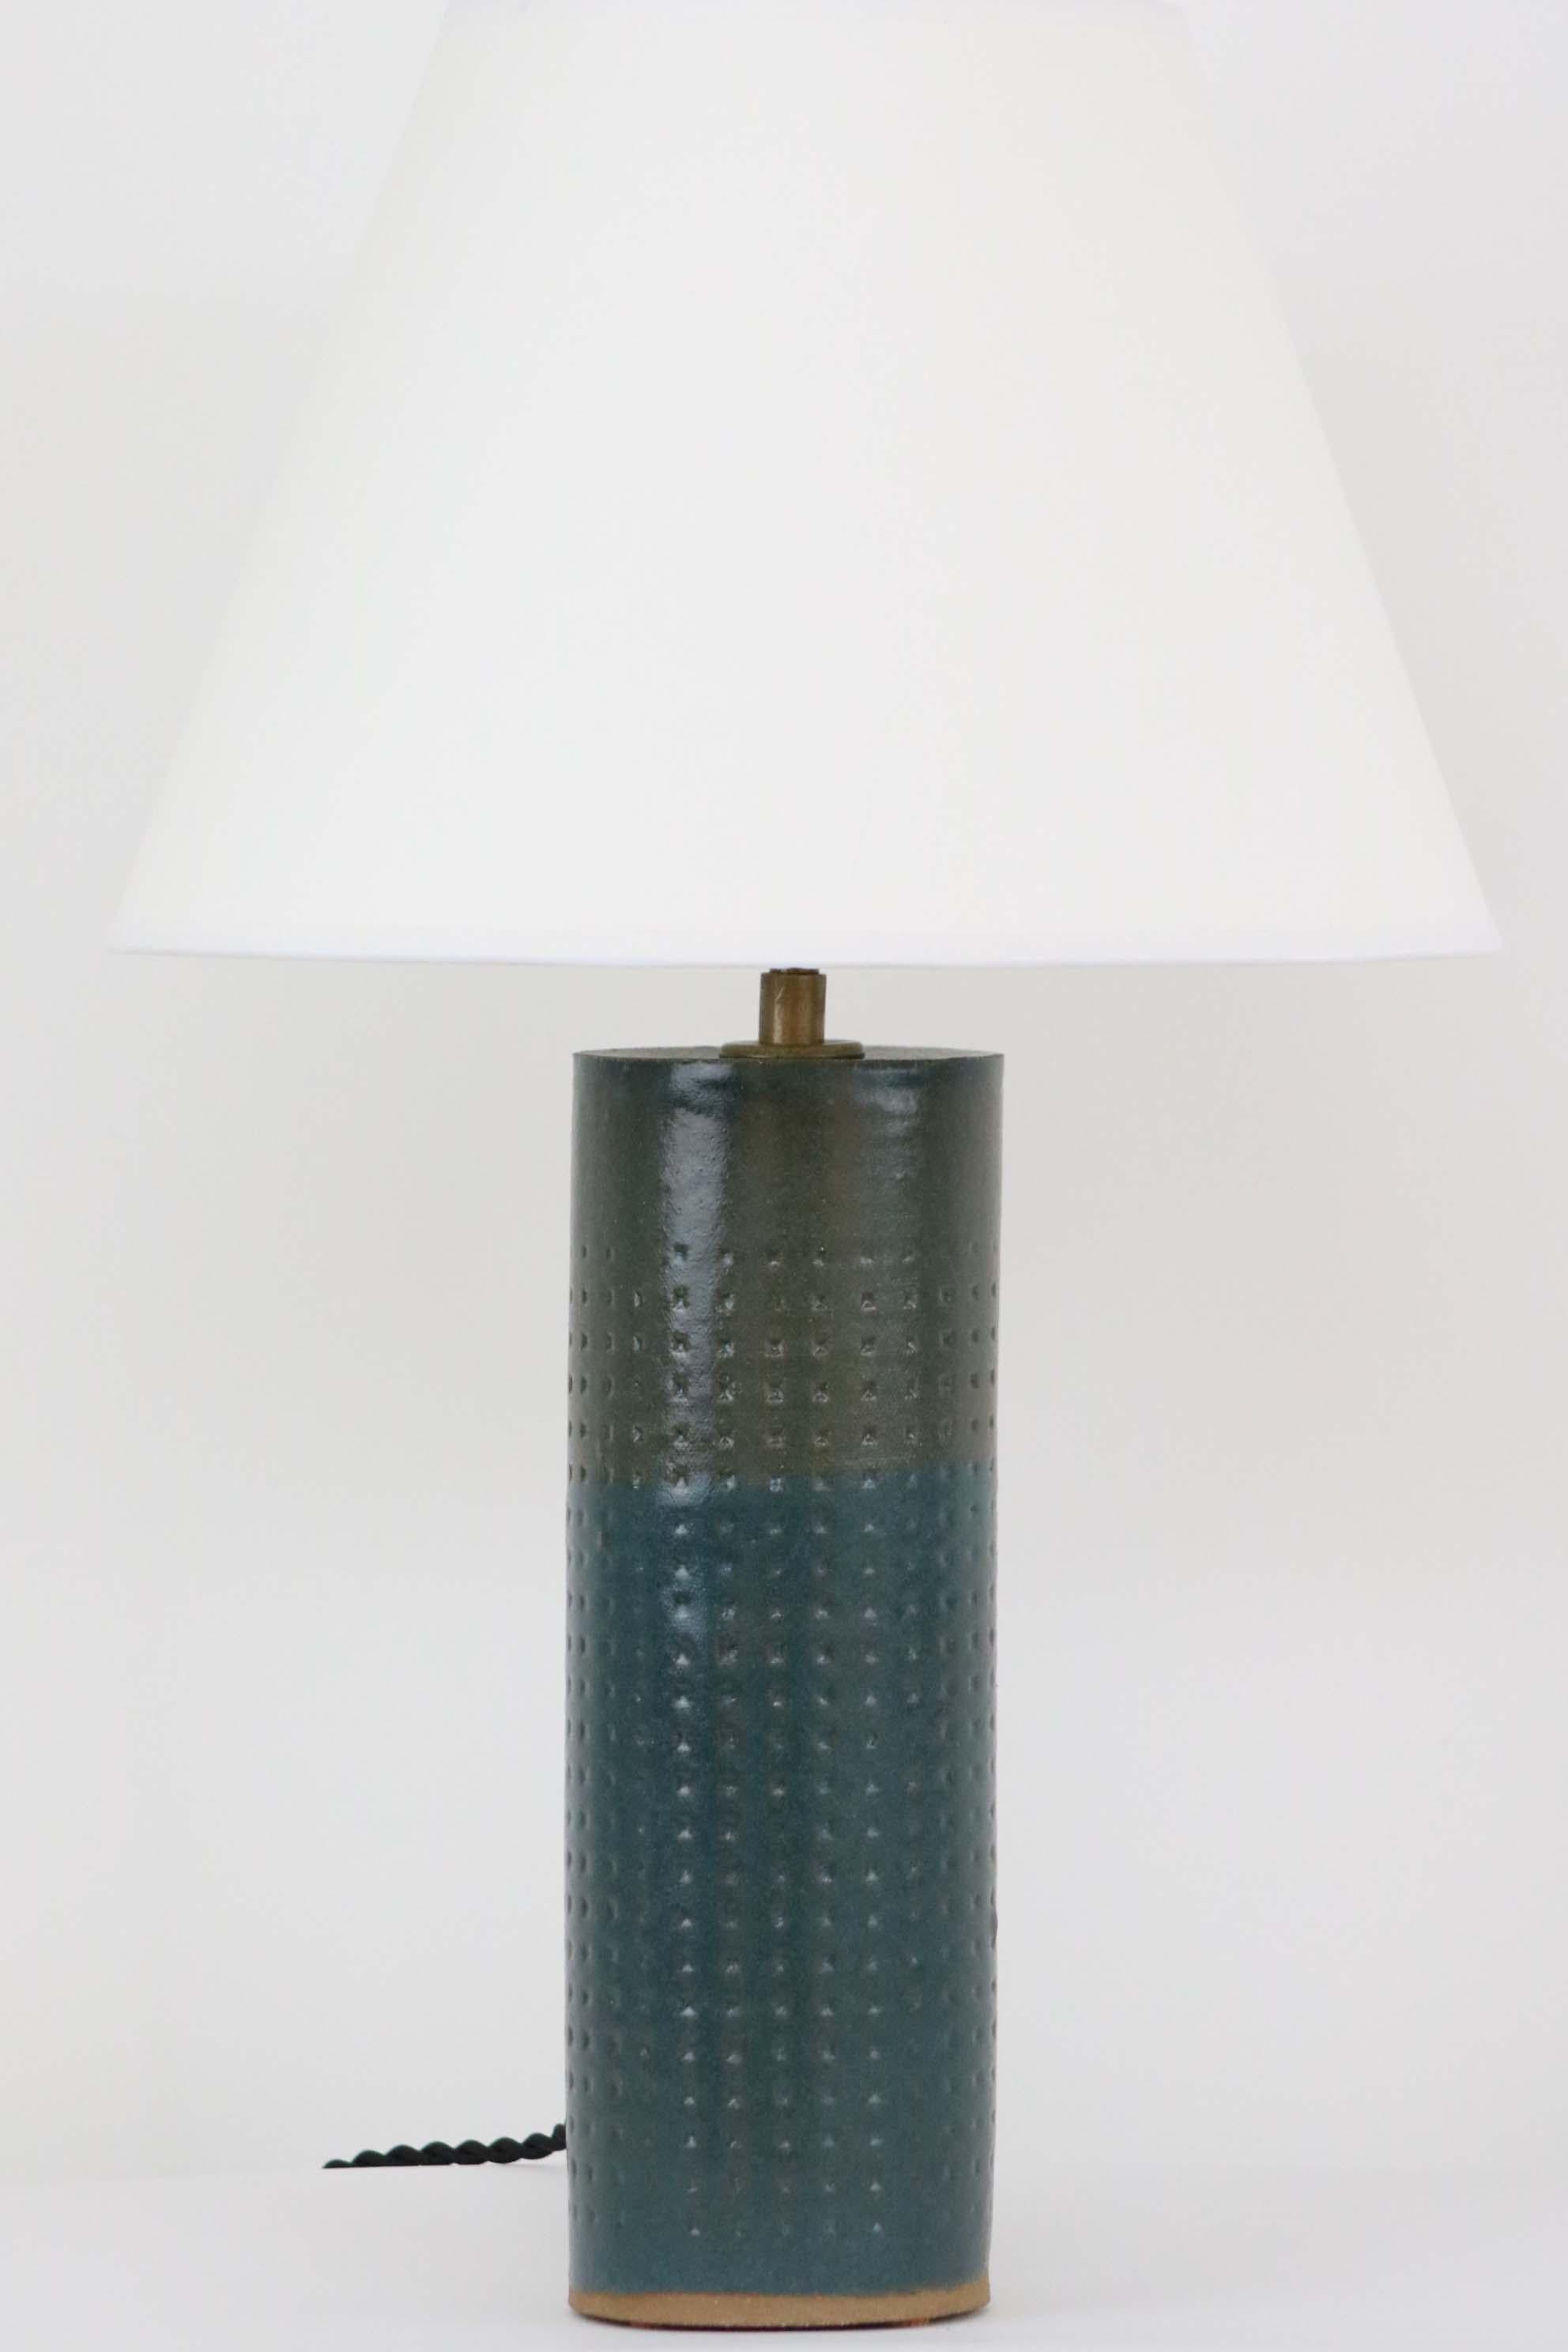 Our stoneware Juliette lamp is handcrafted using slab-construction techniques. The lamp’s pattern is created by rolling the surface with textured rolling pins and rods.

Finish

- Dipped glaze, pictured in Cerulean
- Antique brass fittings
-